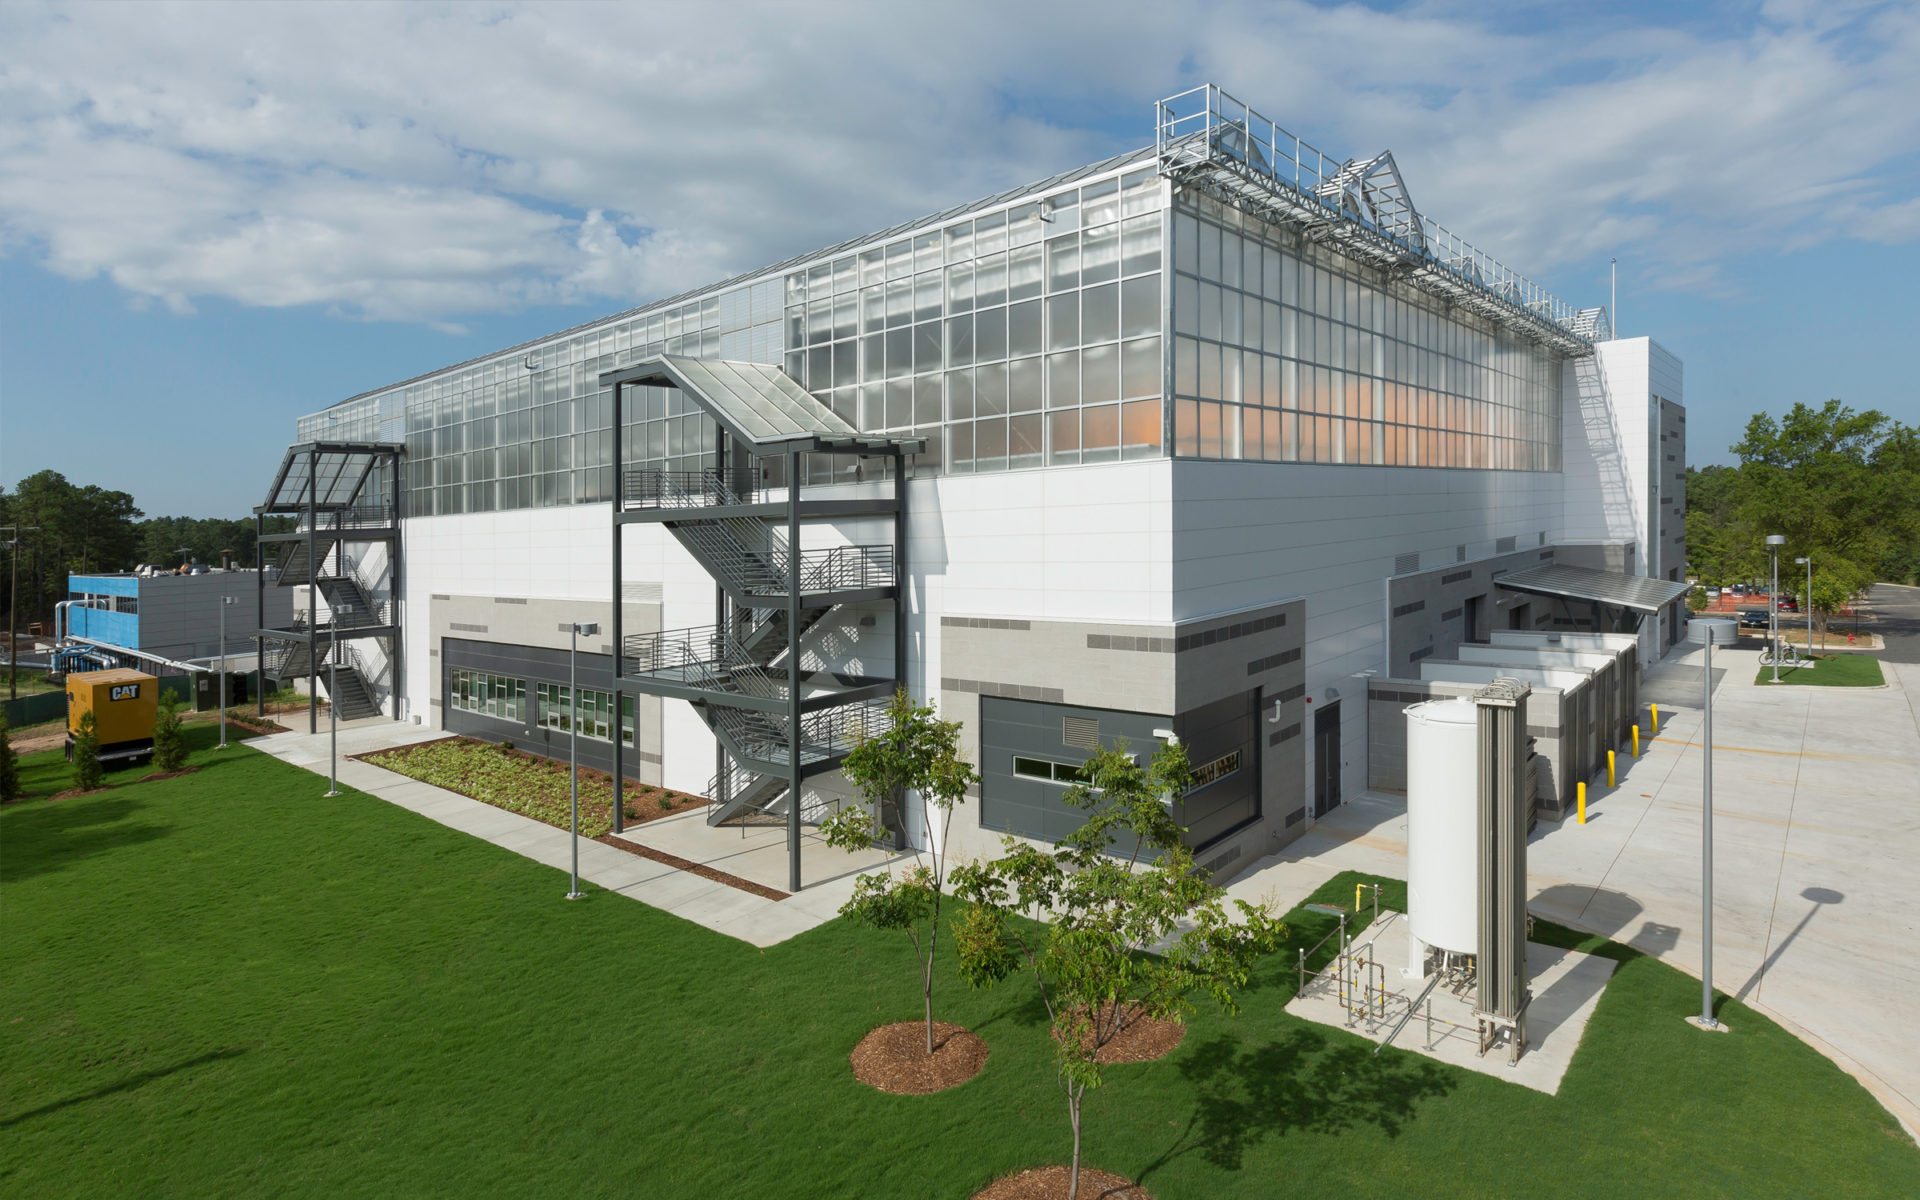 Bayer Greenhouse 5 in Research Triangle Park, NC; Architect and engineer: Clark Nexsen